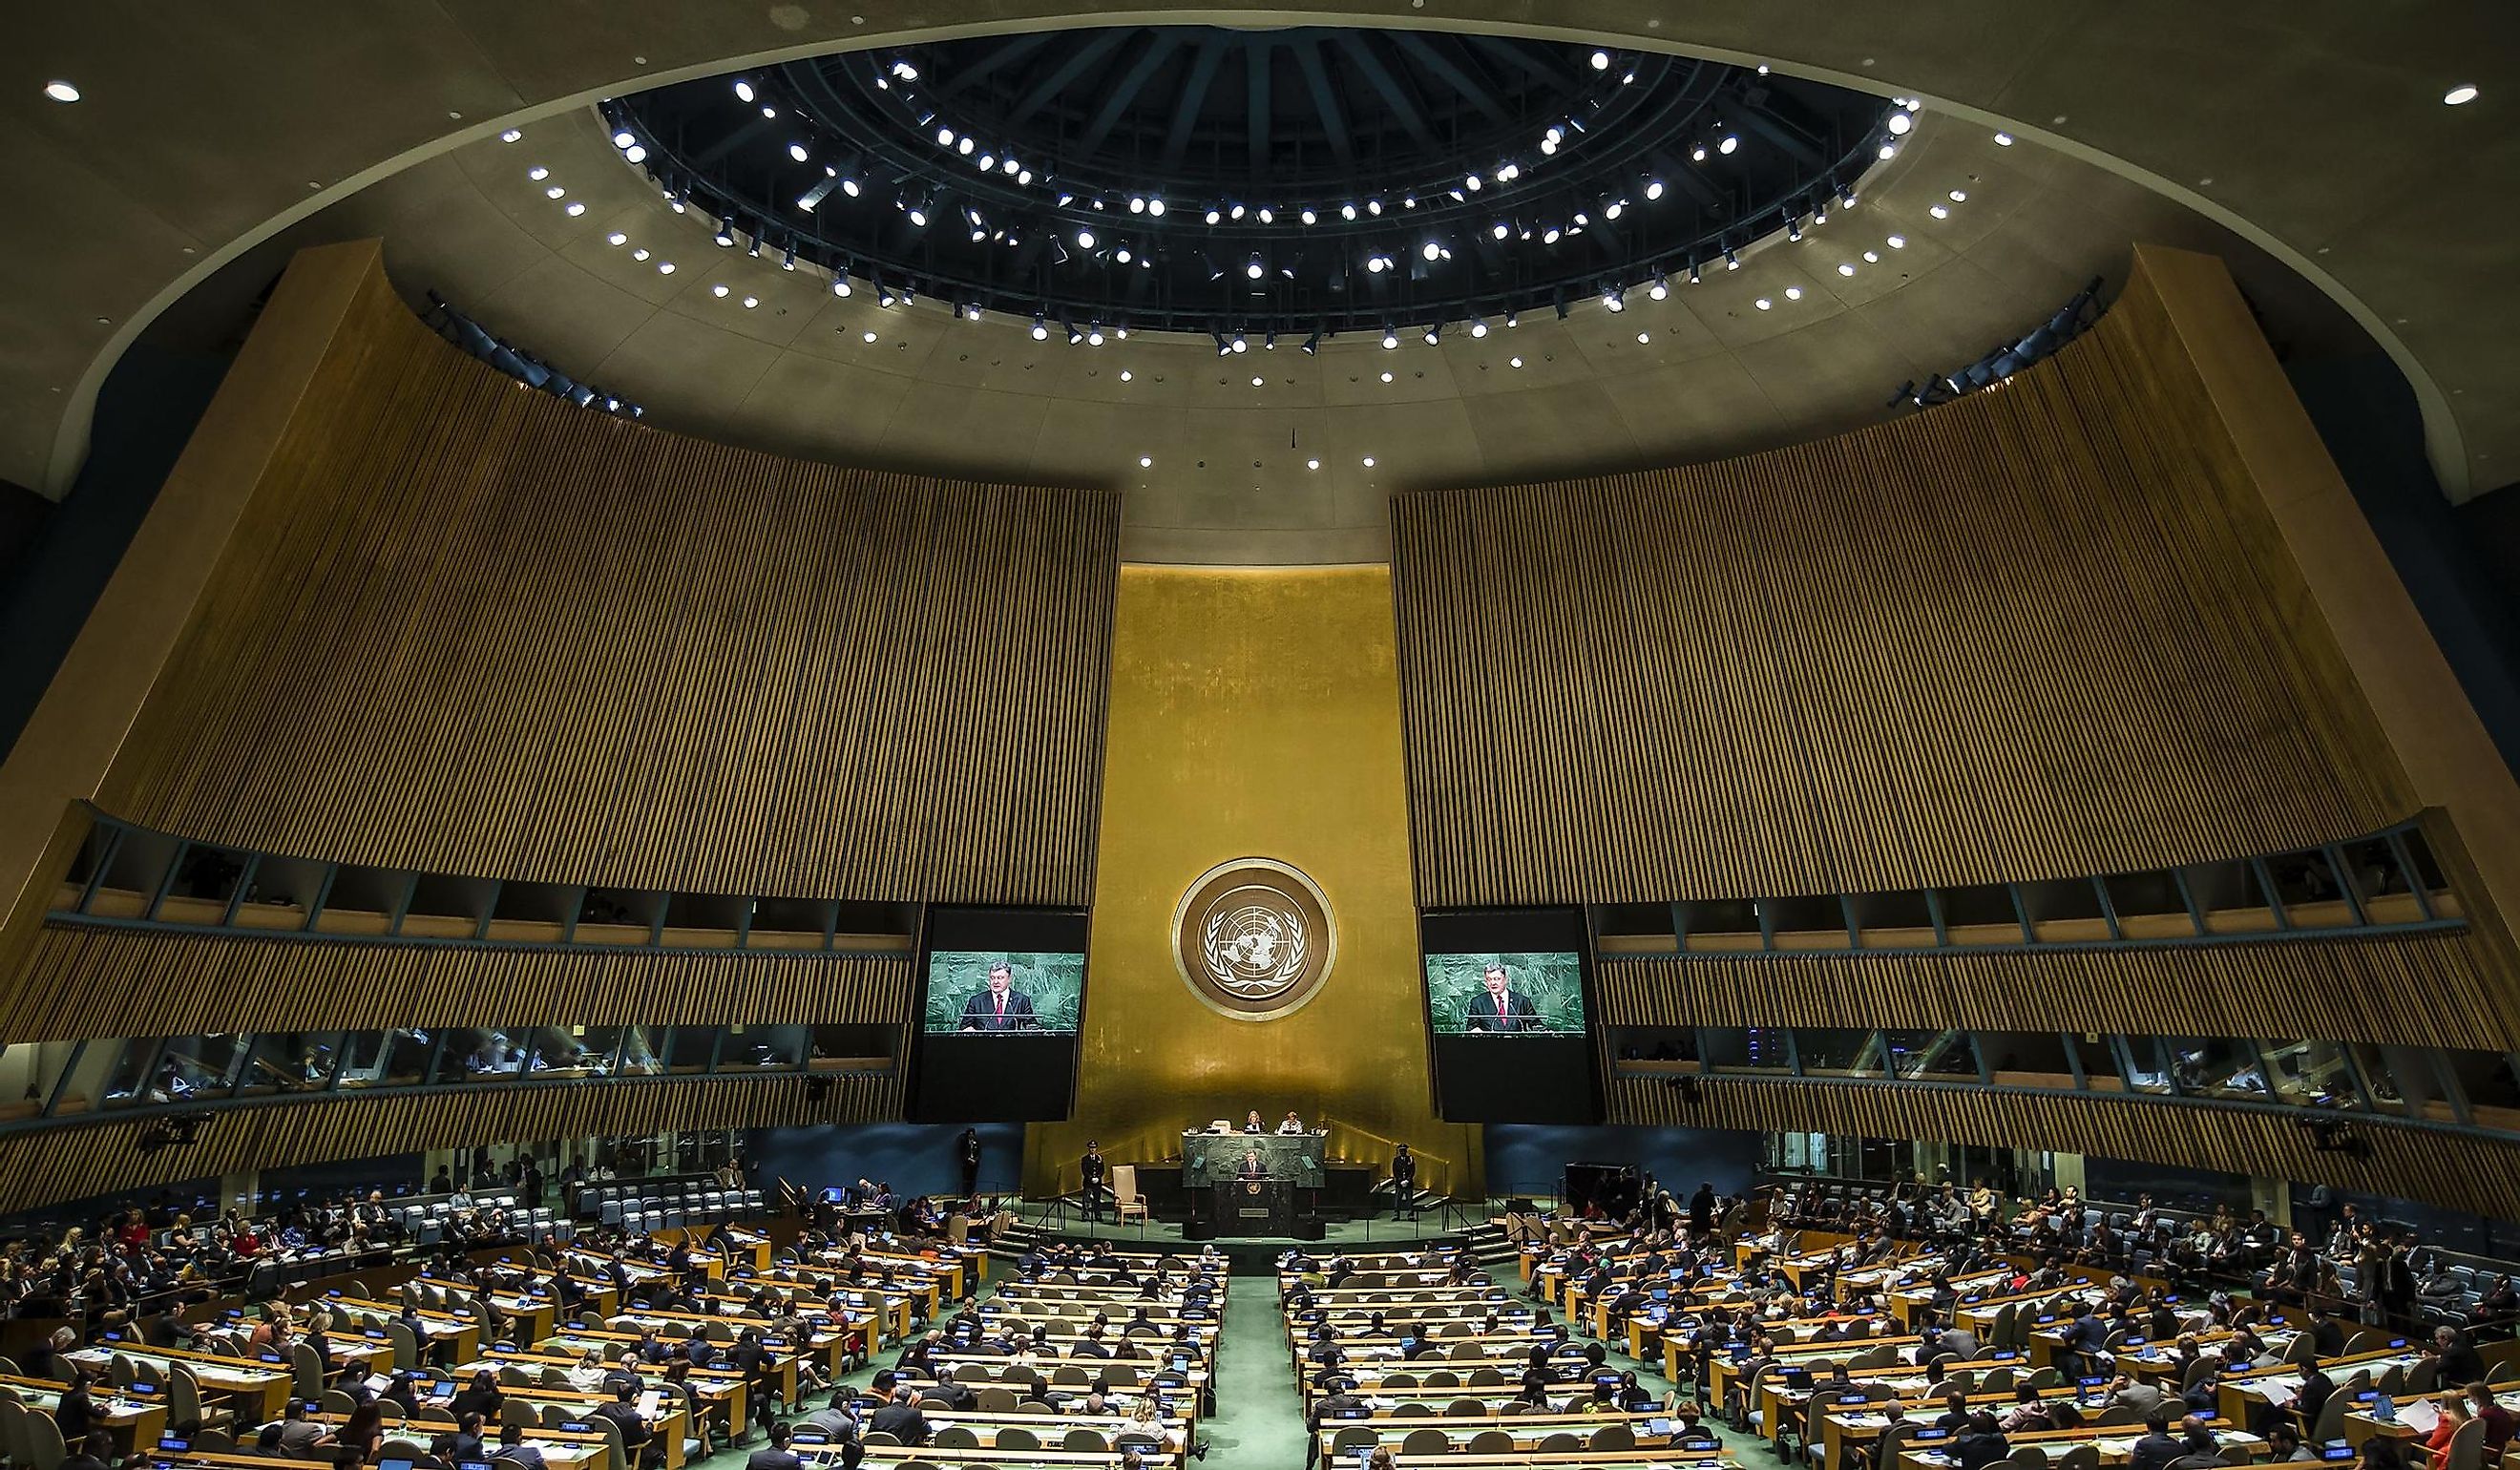 NEW YORK, USA - Sep 29, 2015: A Speech During a General Assembly of the United Nations in New York